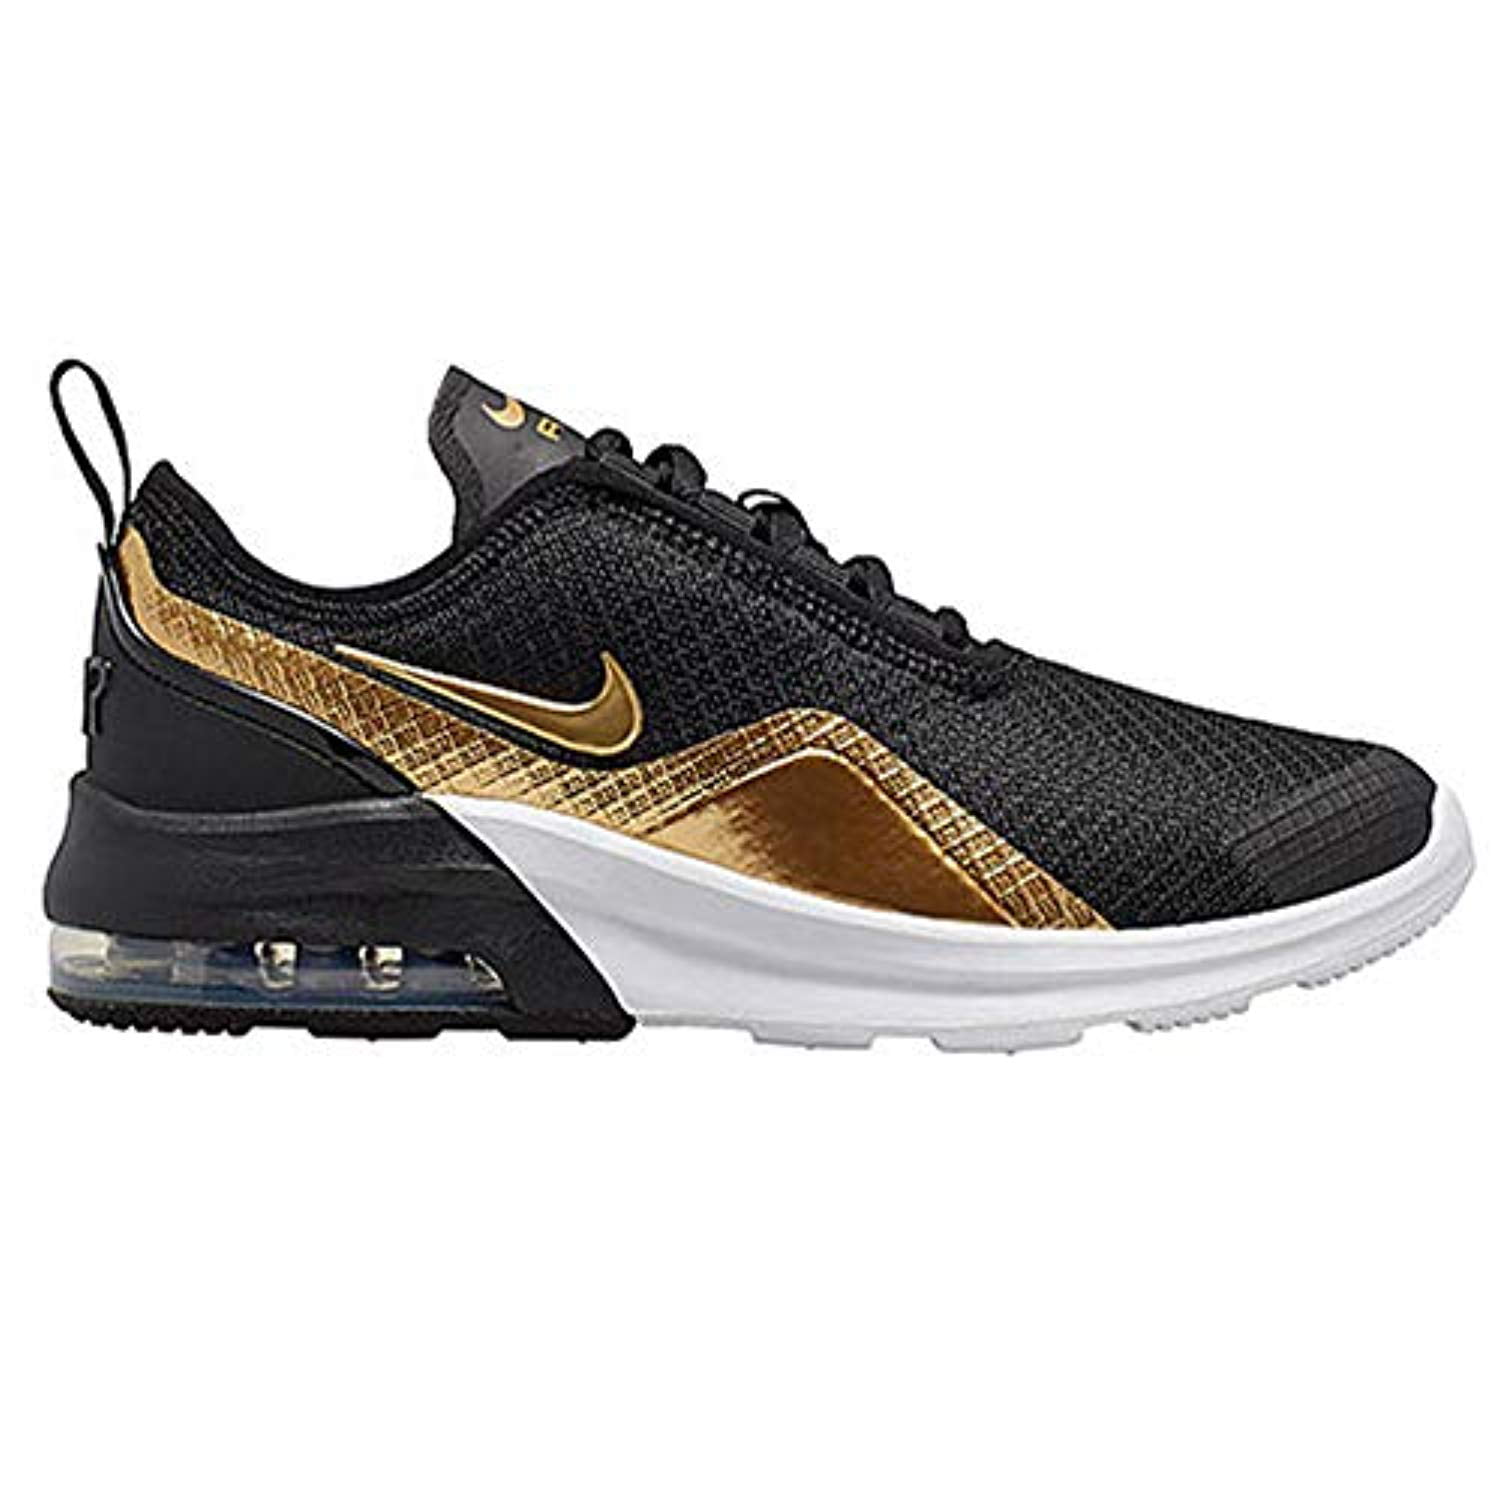 nike air max motion black and gold